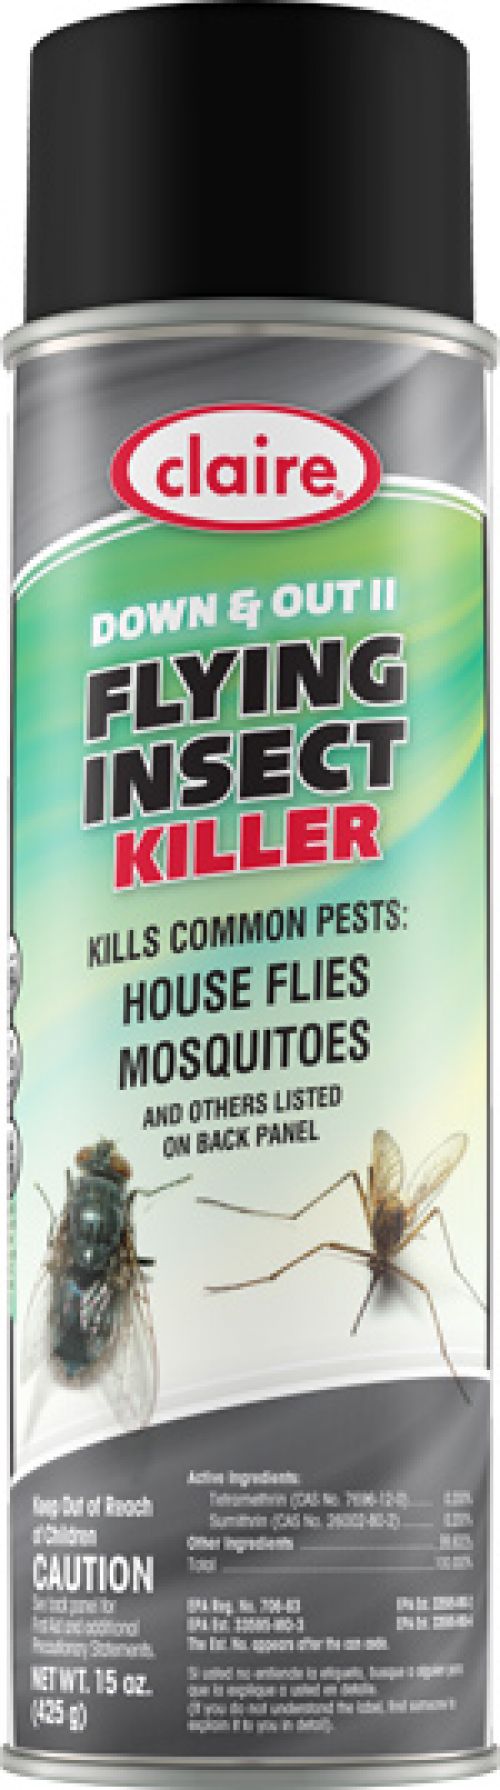 DOWN & OUT II Flying Insect Killer Pack 12/15 oz